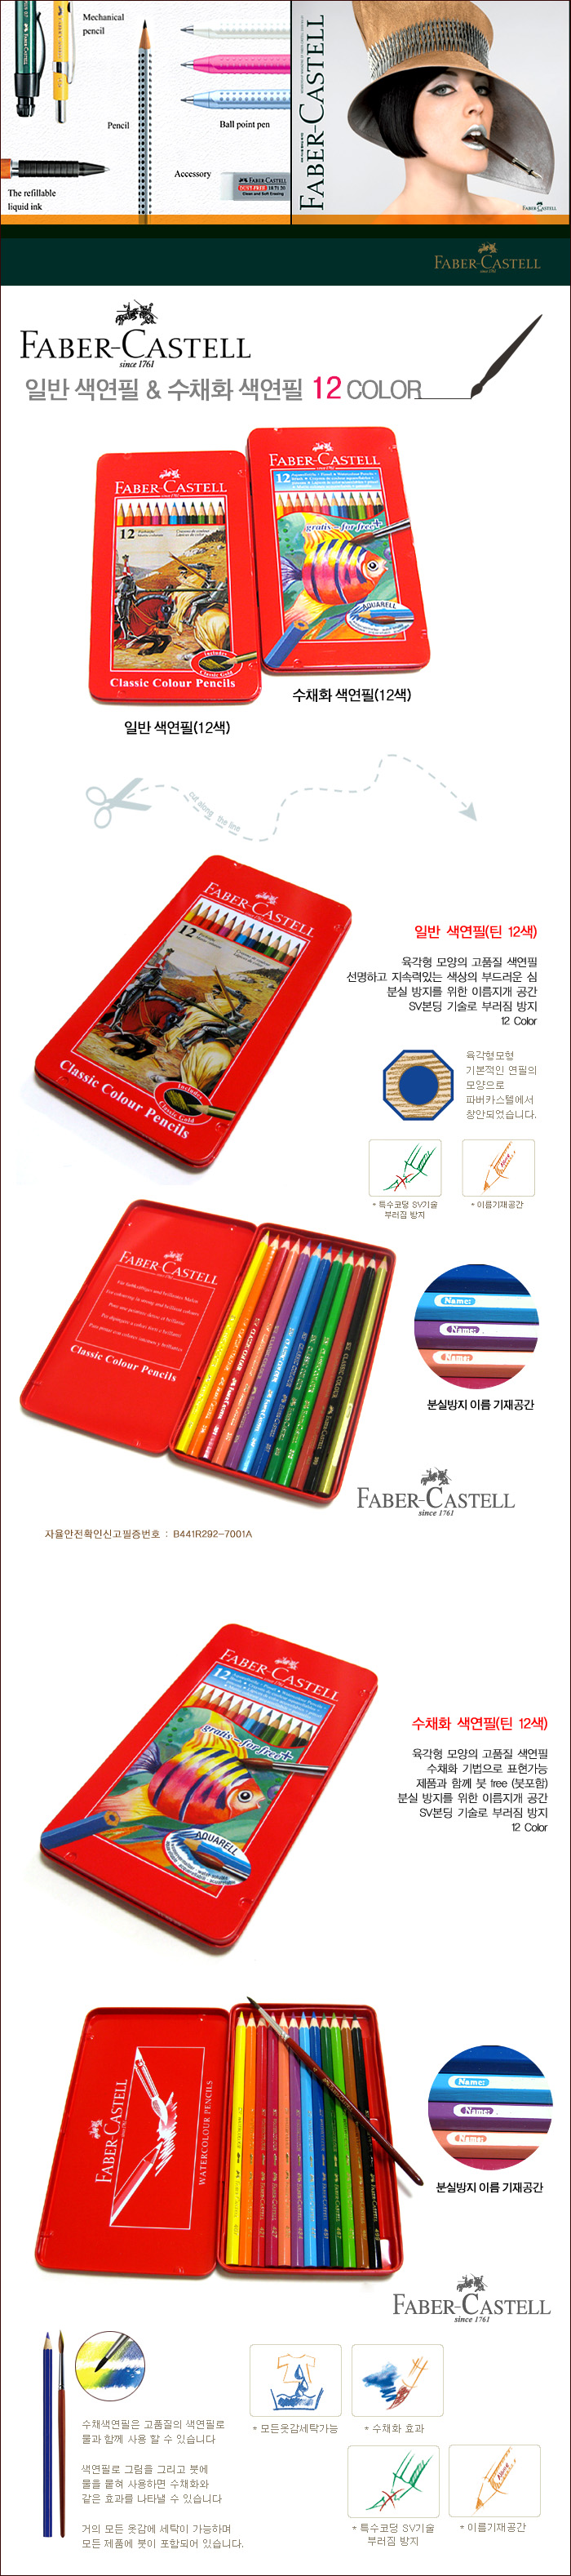 Genuine Faber-Castell / general drawing / Tin Case set of 12 color / 12-water color drawing set / POP